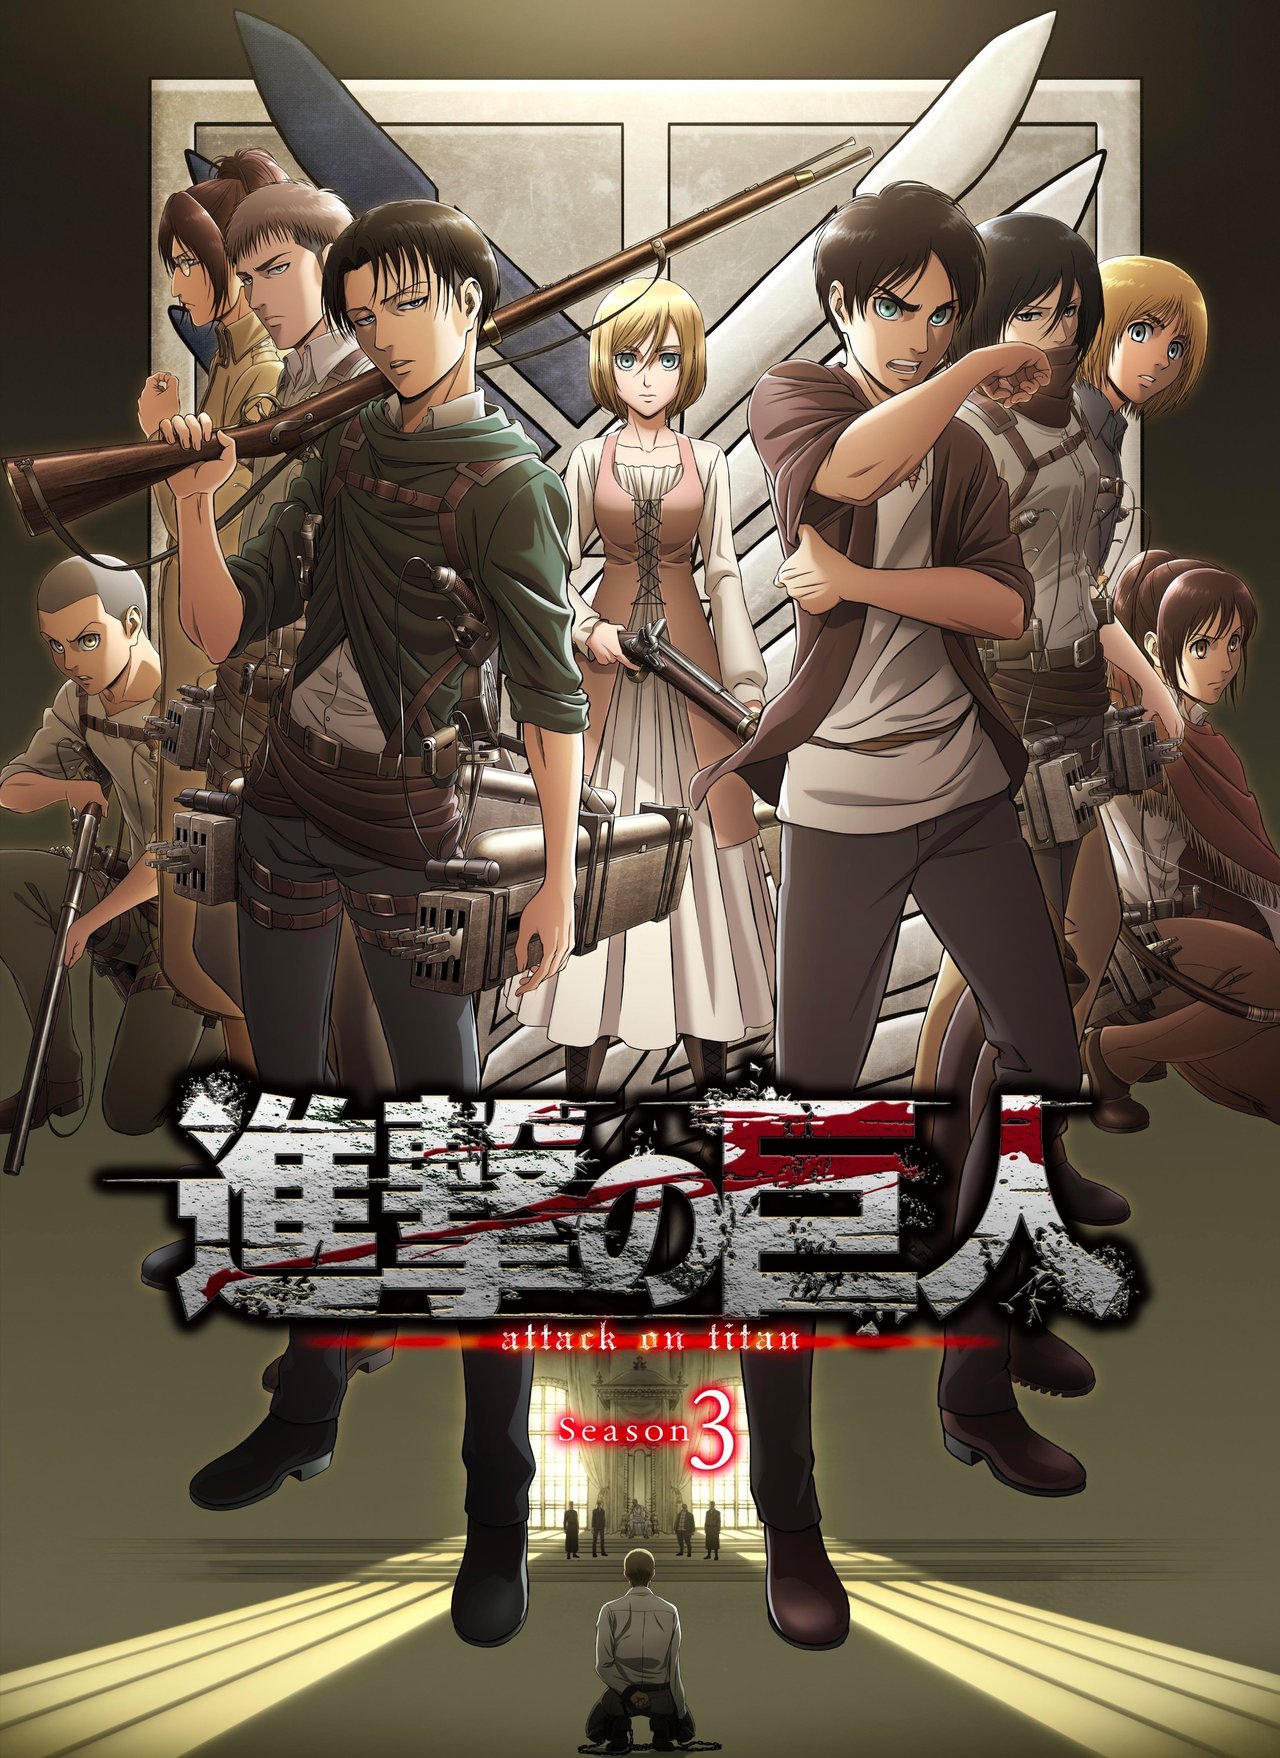 The first episode of the Ã¢ÂÂAttack on TitanÃ¢ÂÂ S3 anime will have a world premiere screening at Anime Expo on July 8th. Its regular TV broadcast begins July 22nd on NHK.